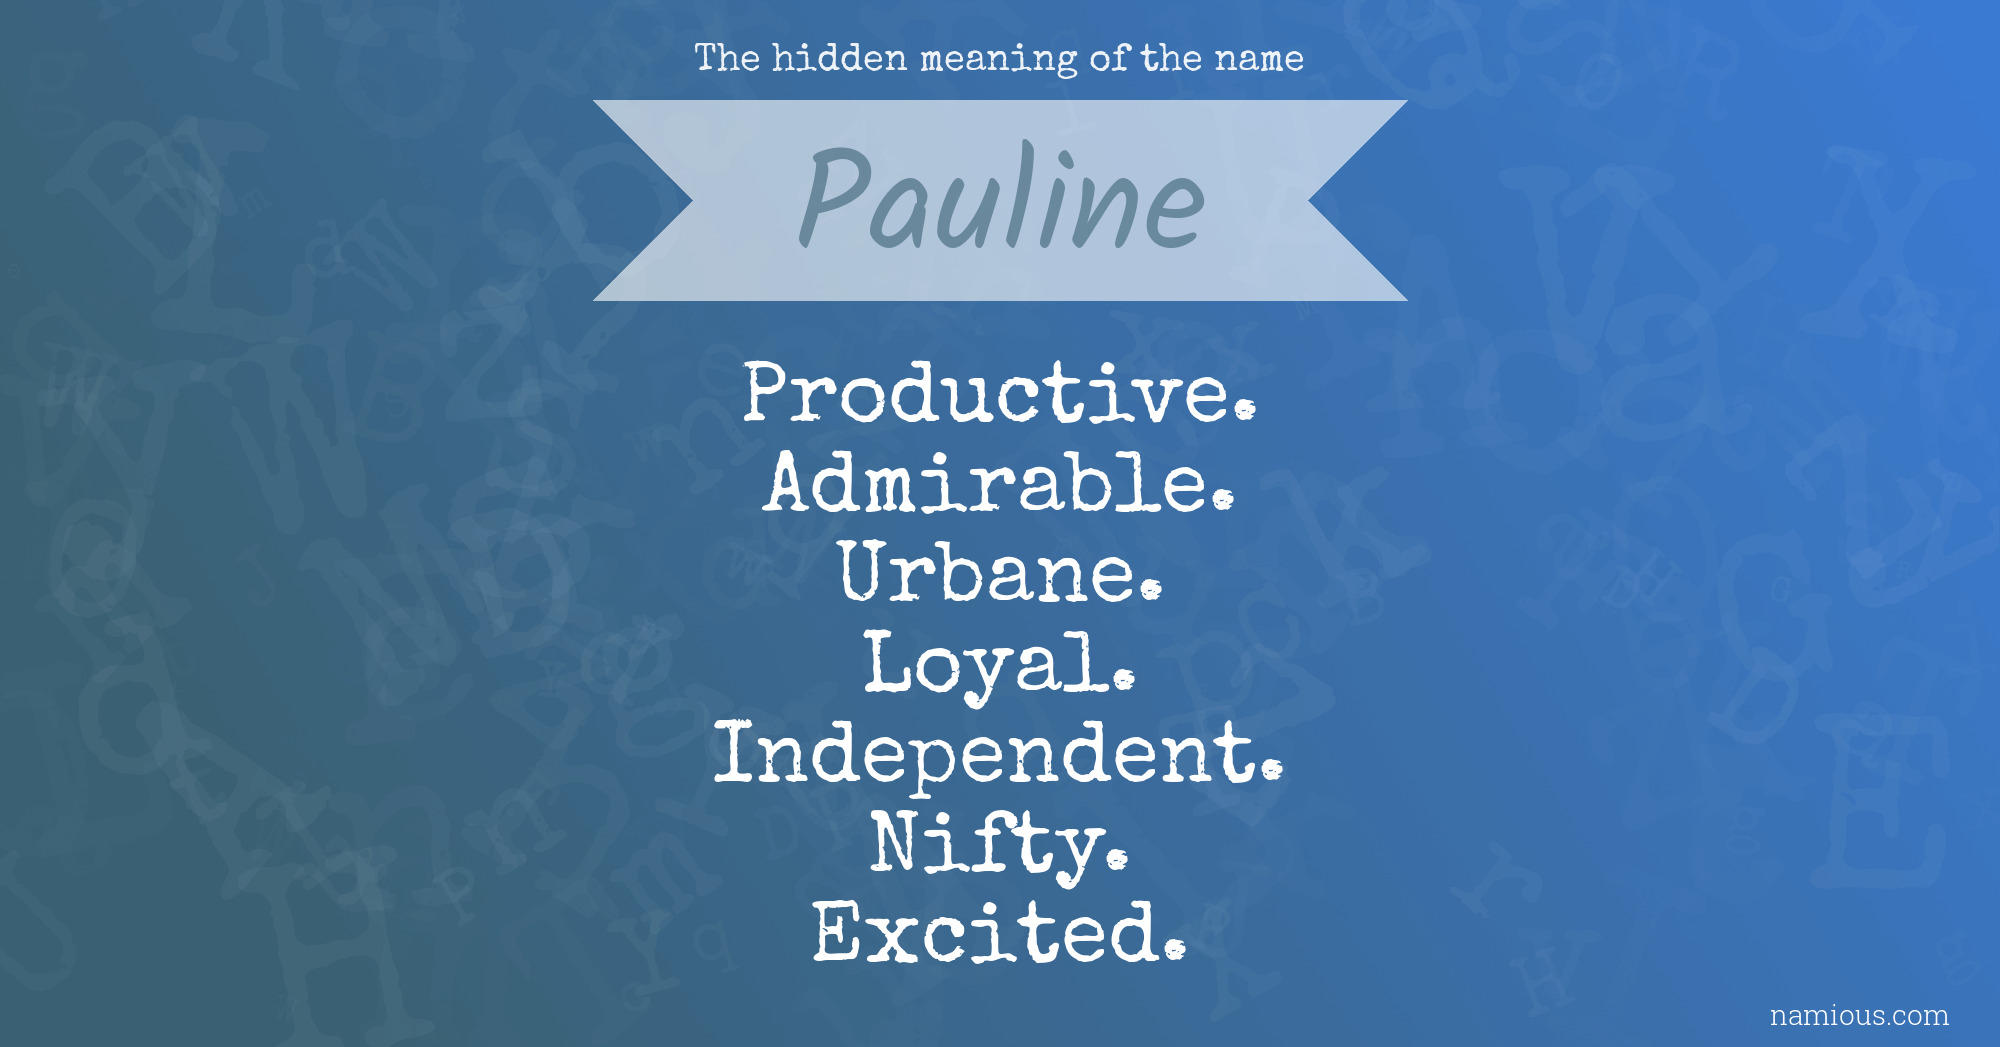 The hidden meaning of the name Pauline